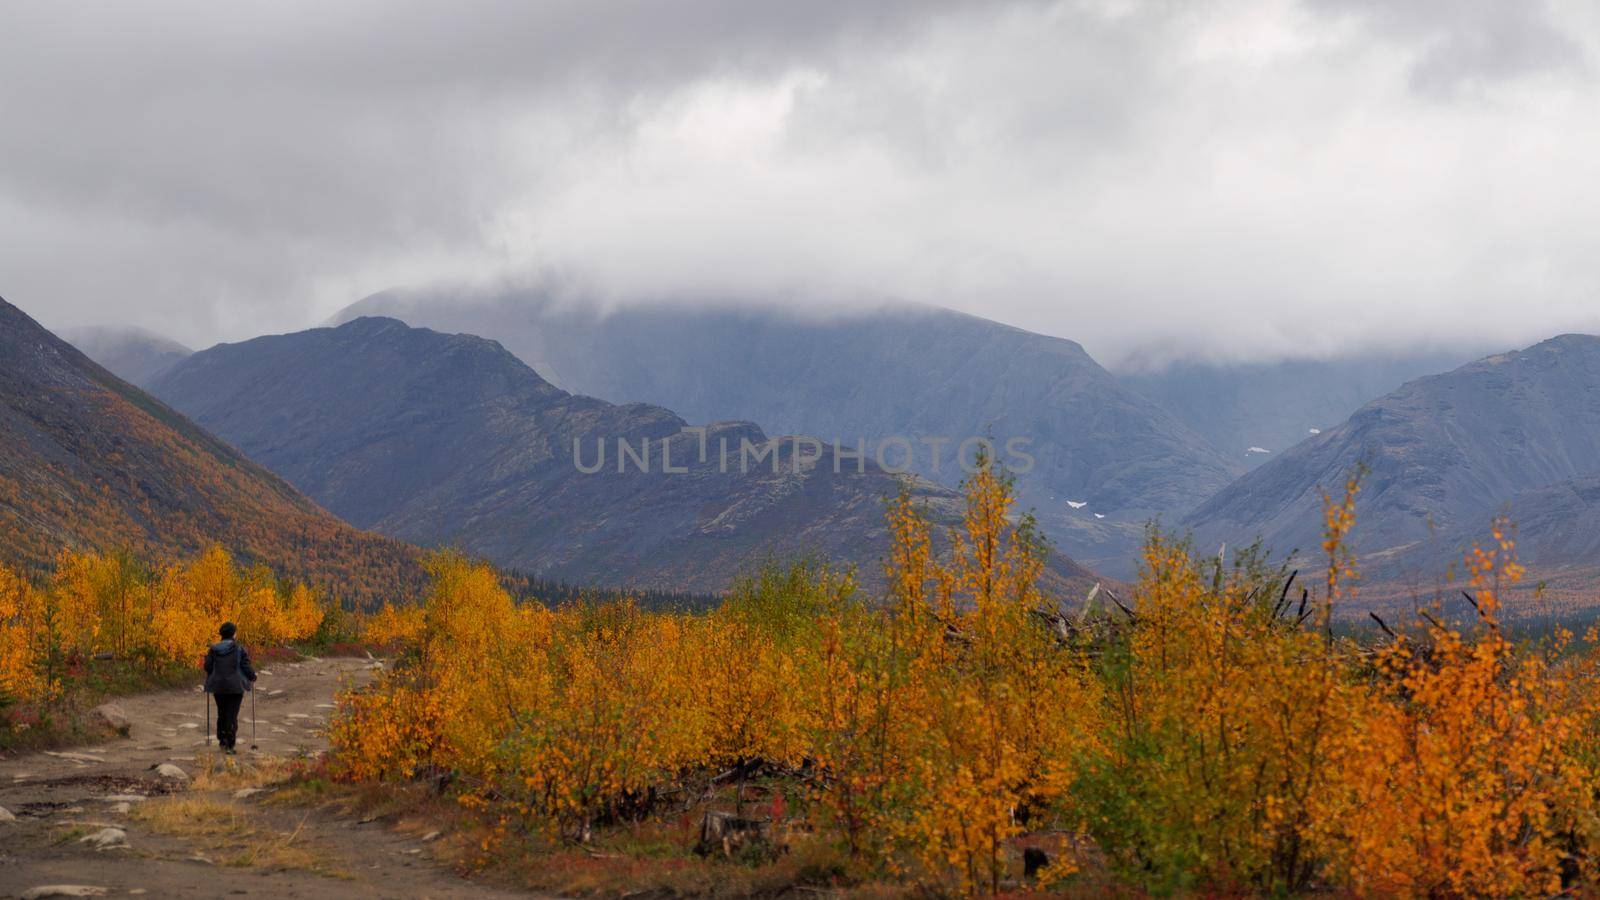 A woman in the autumn season walks along a path in the mountains on a rainy day. by Andre1ns